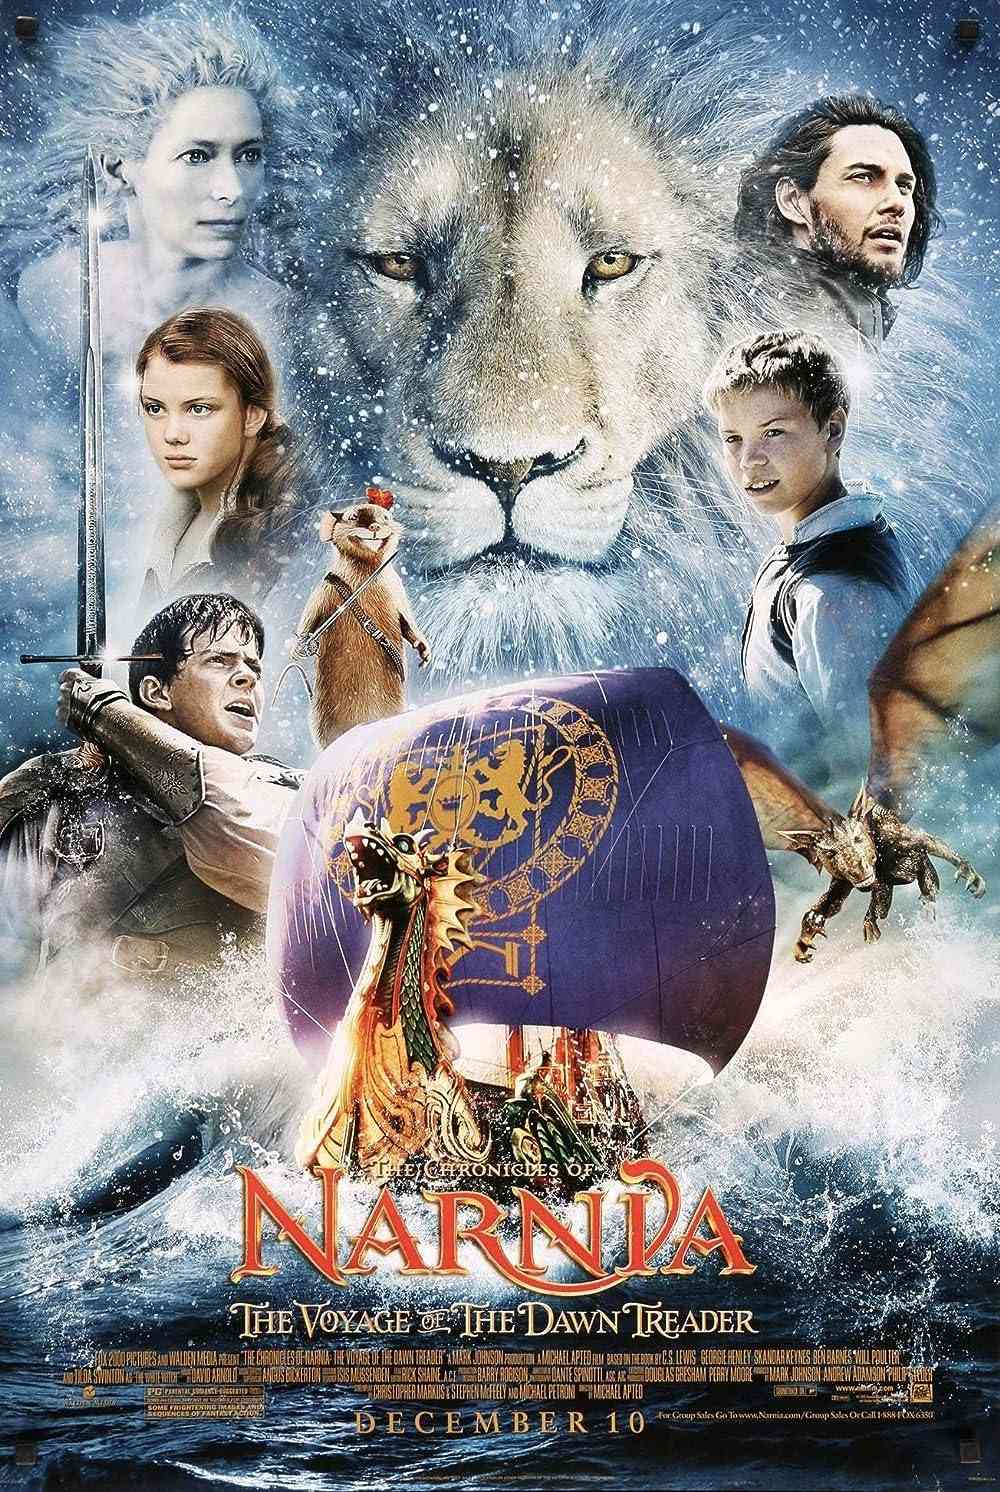 DOWNLOAD The Chronicles of Narnia: The Voyage of the Dawn Treader (2010)